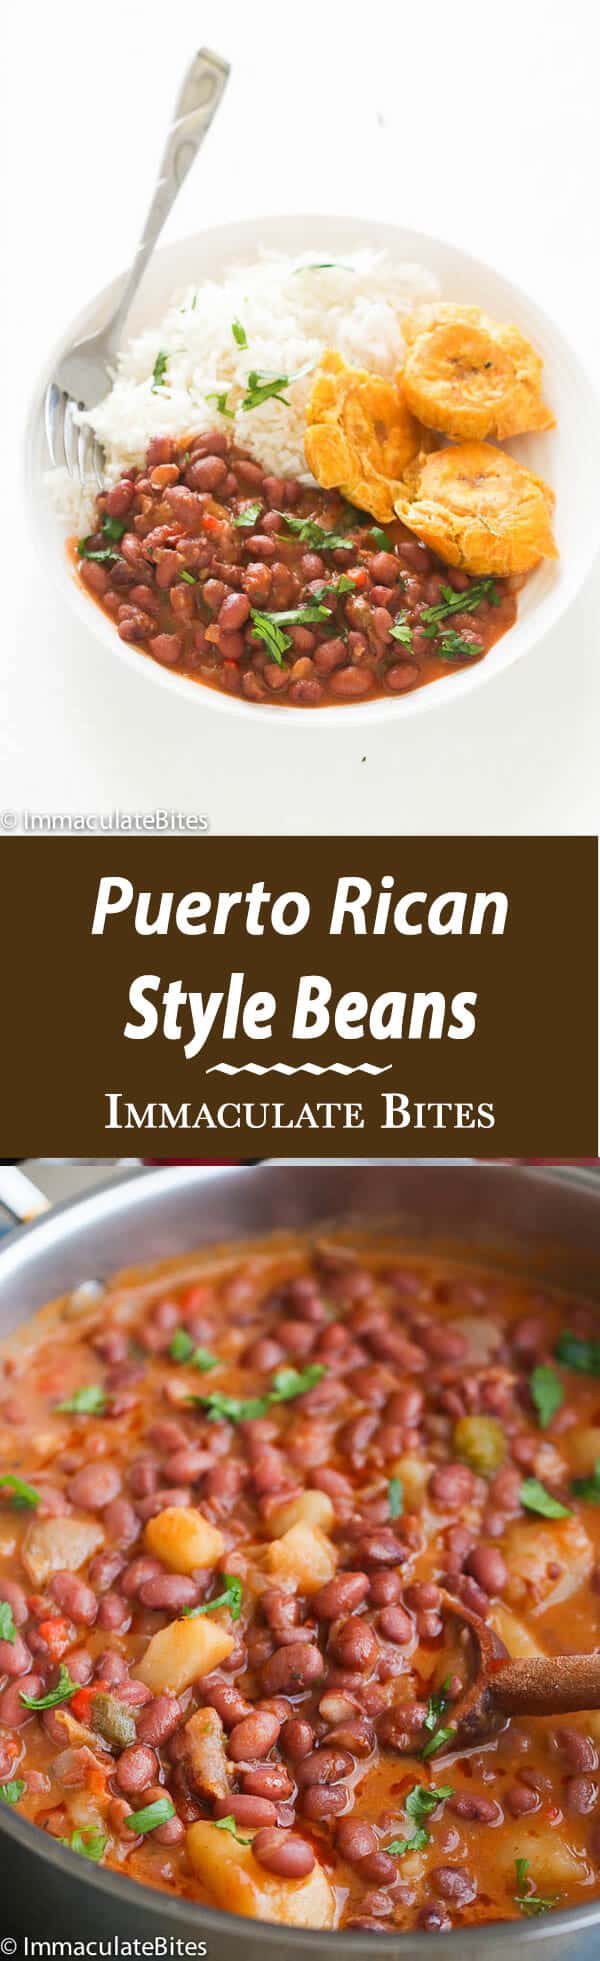 Puerto Rican Style Beans